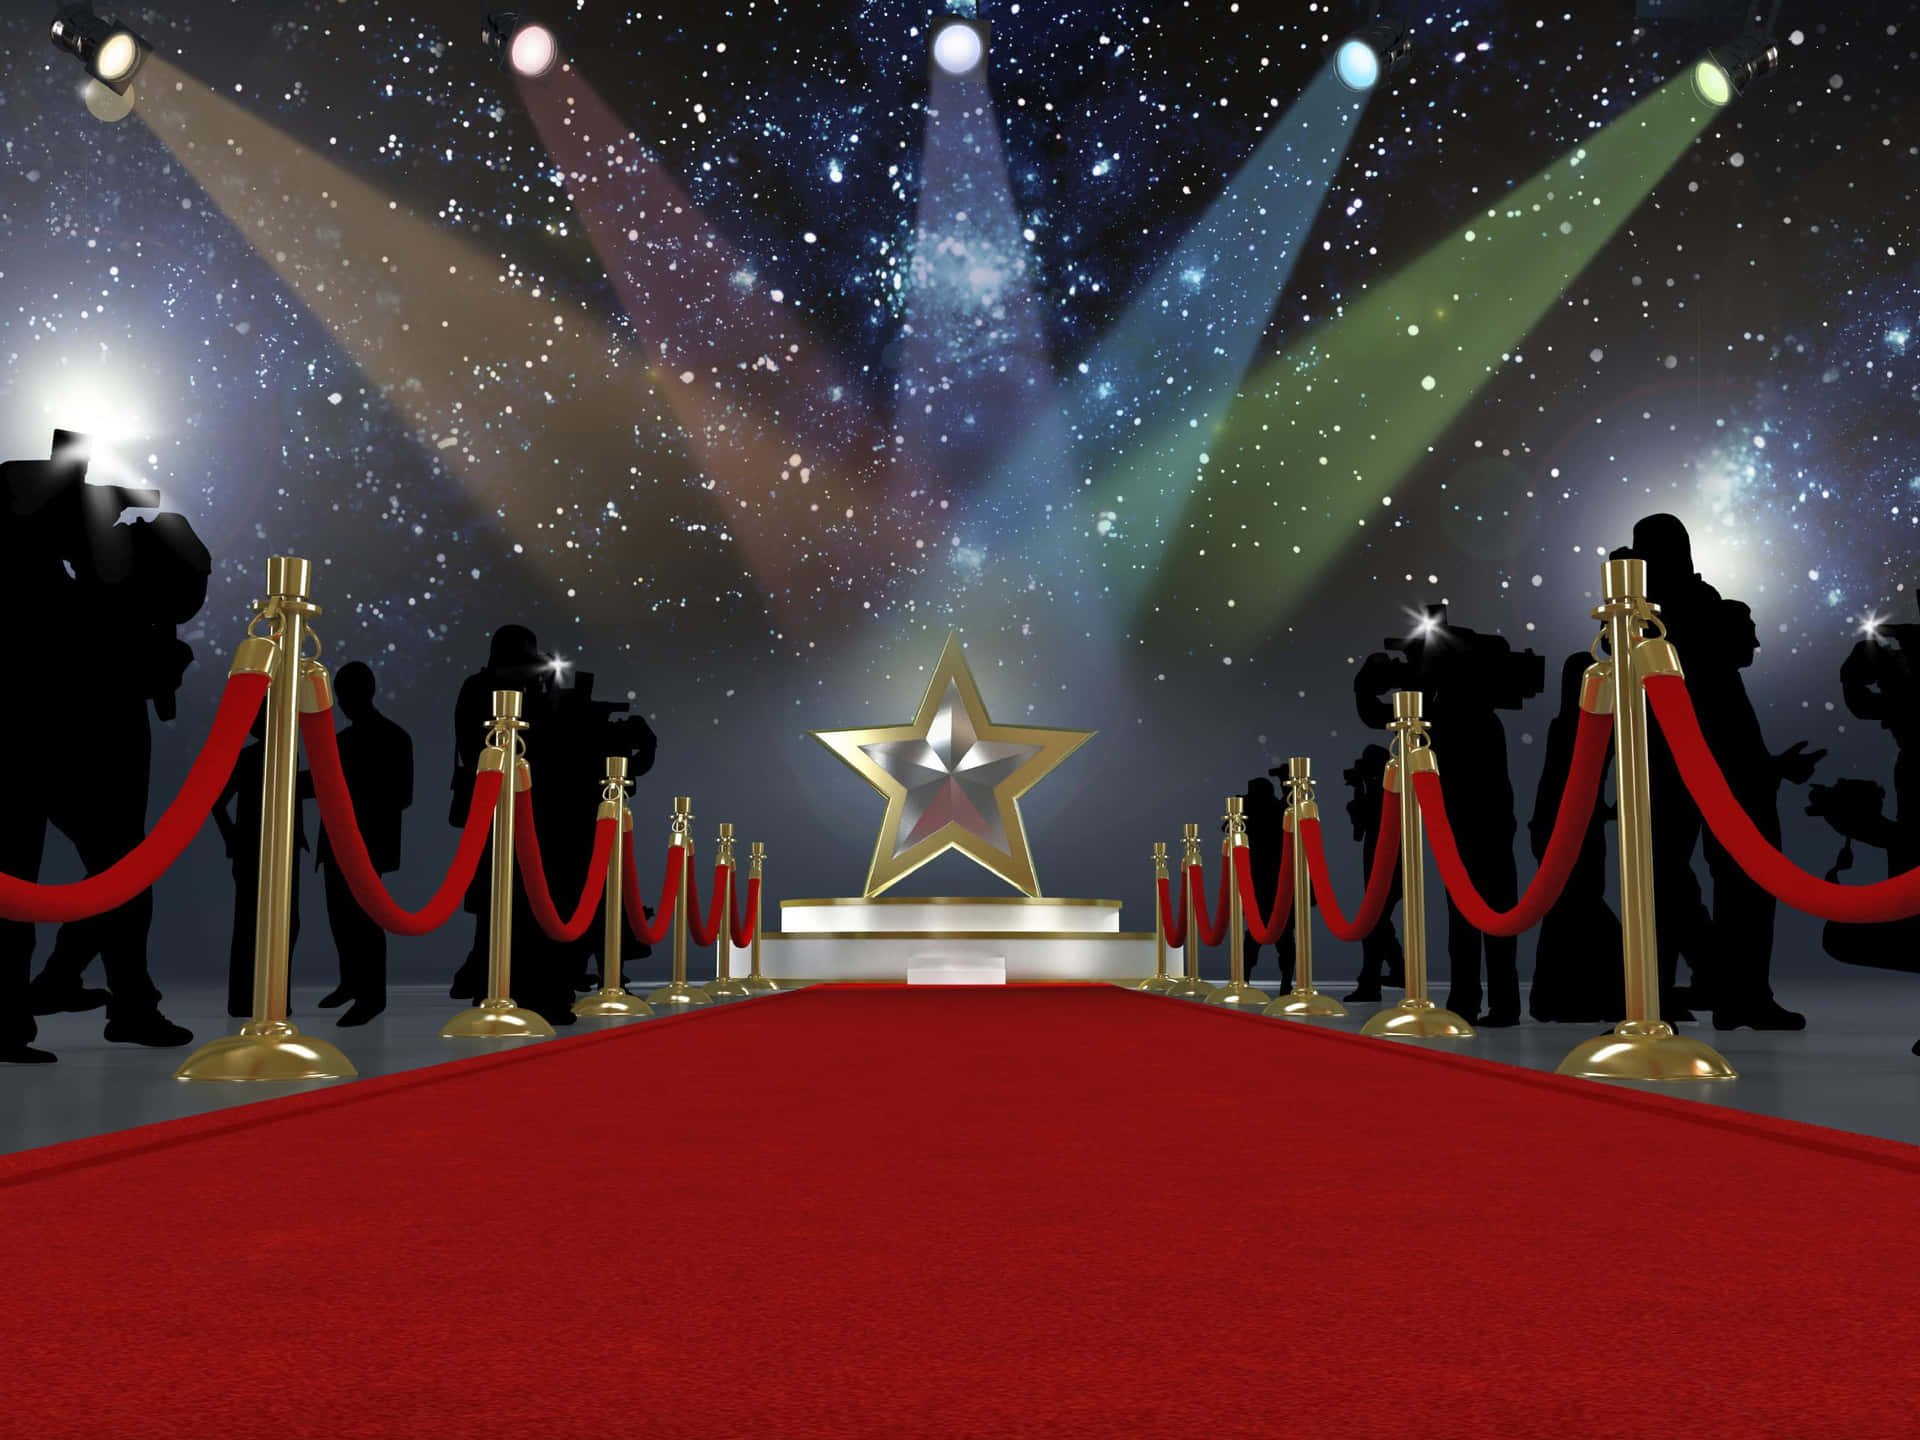 Look at this beautiful red carpet, setting the scene for a spectacular event! Wallpaper